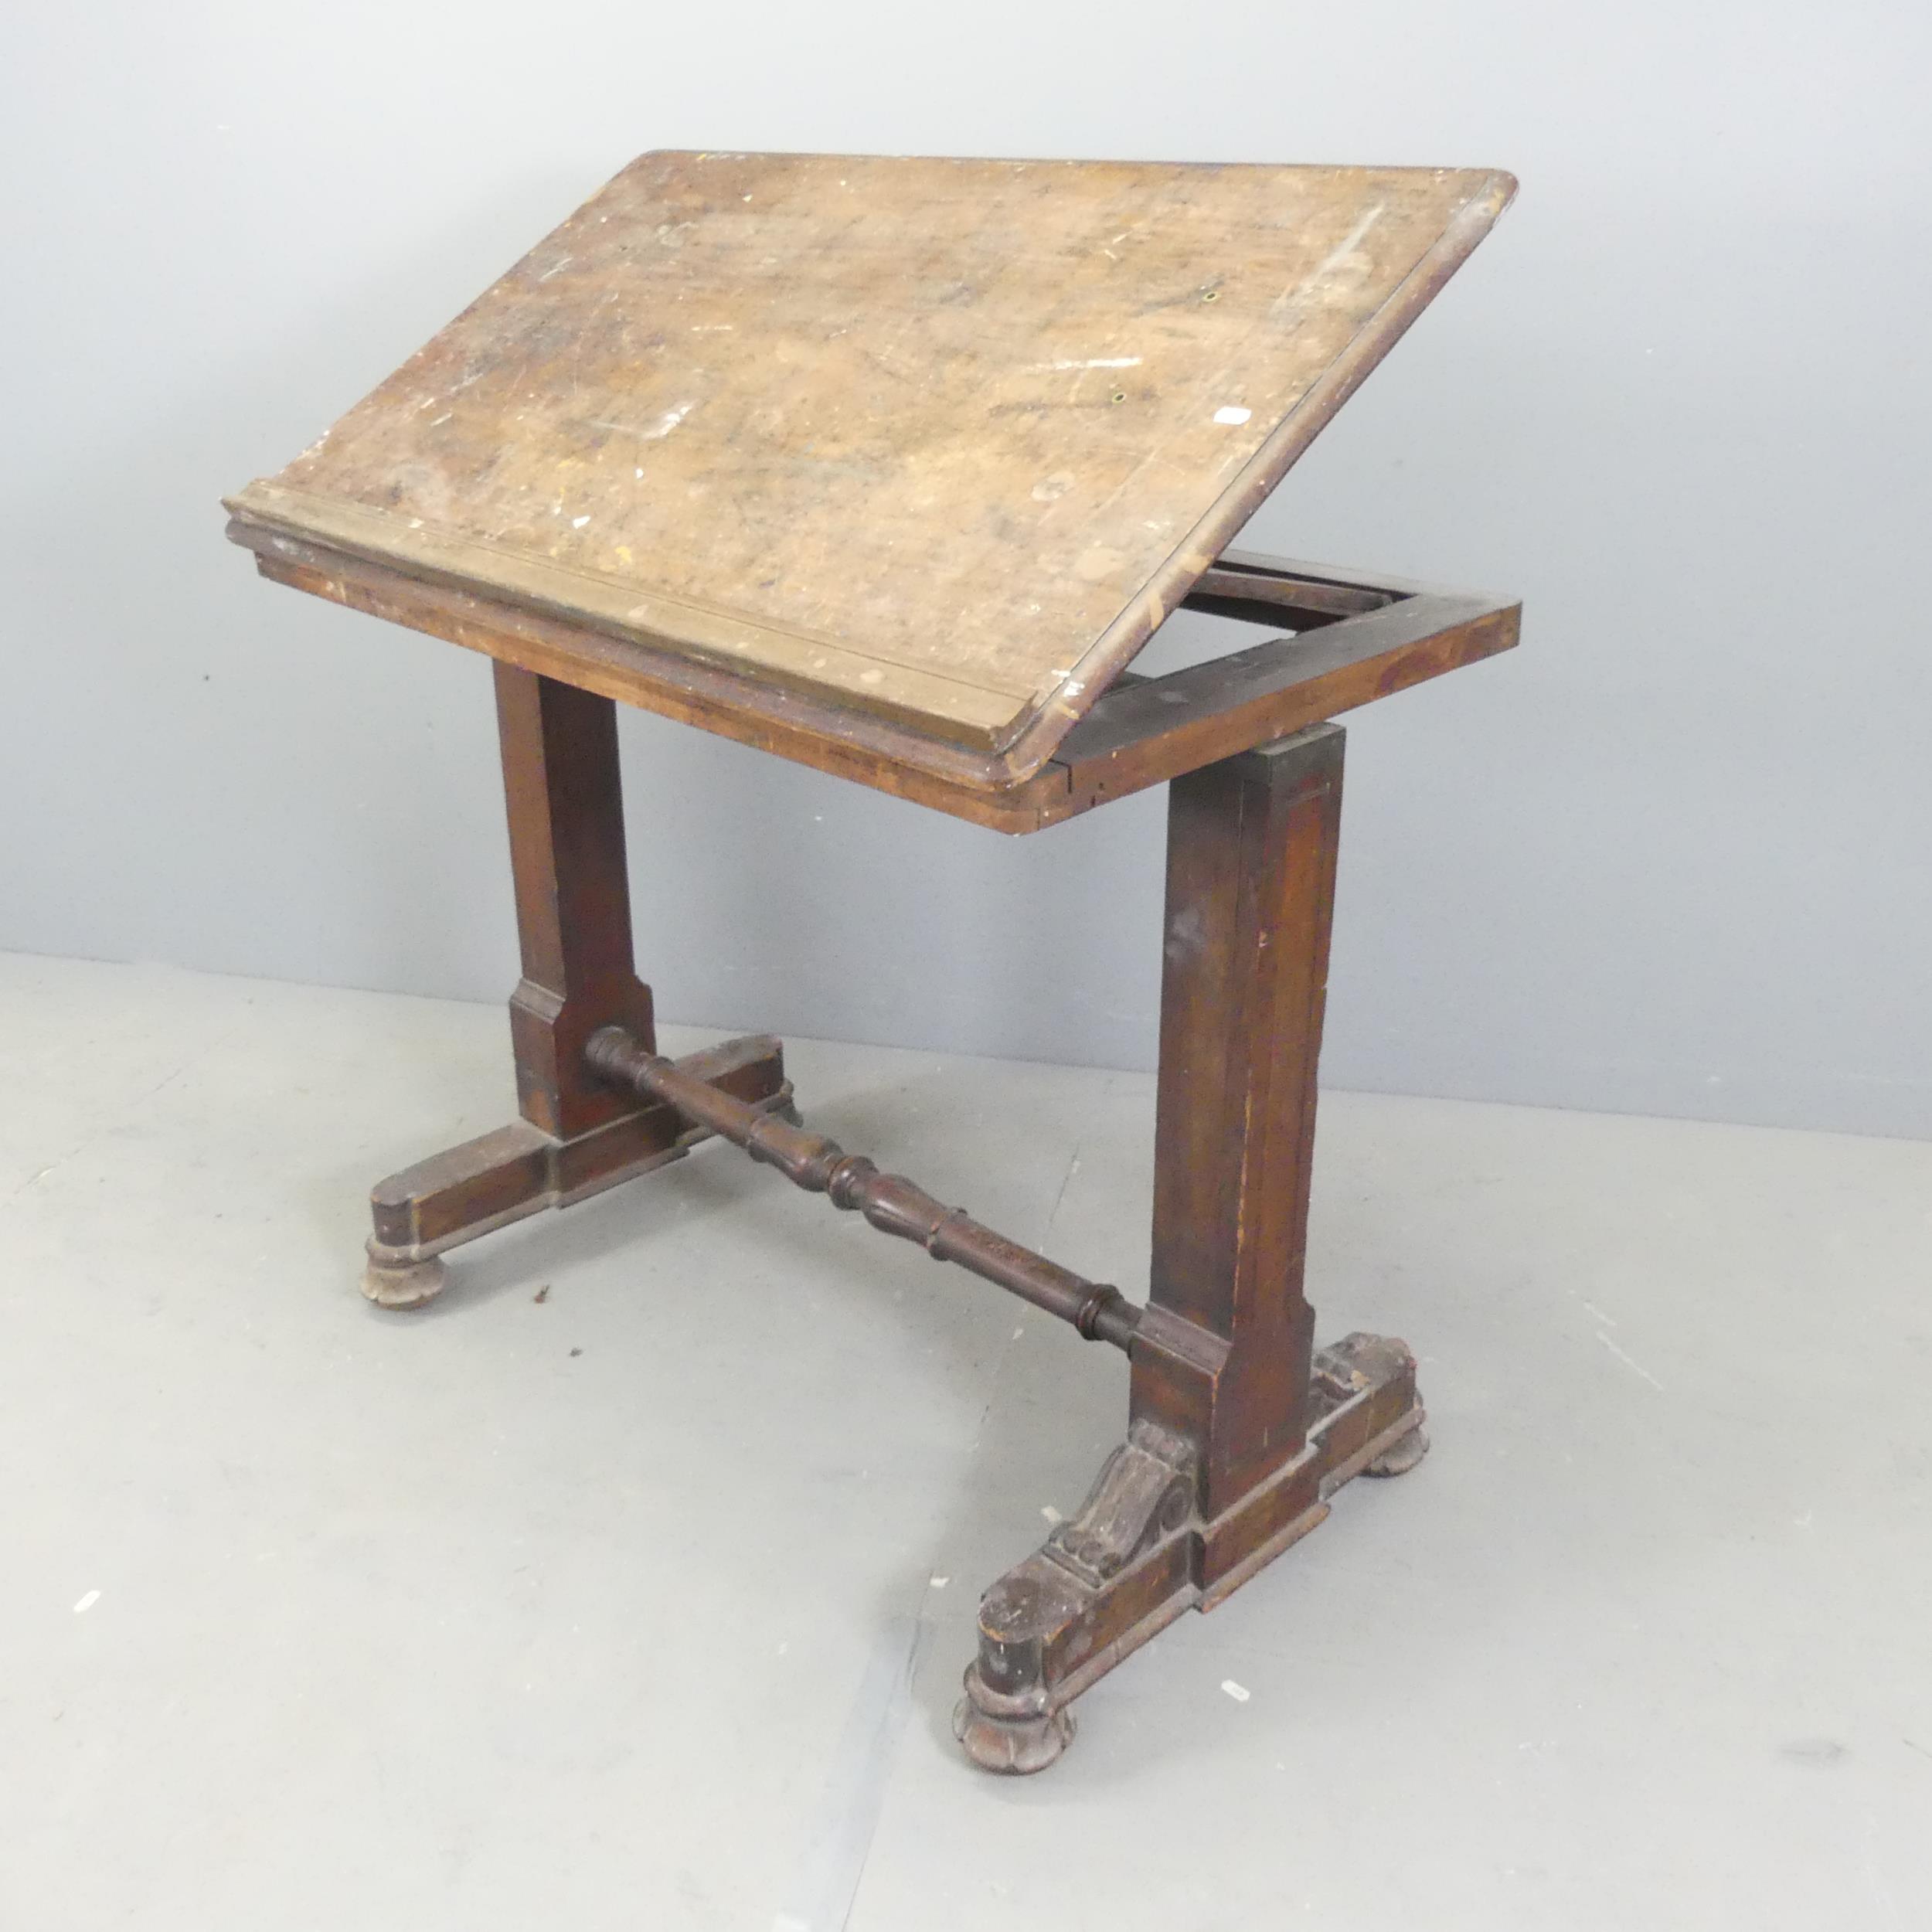 A 19th century oak adjustable Architect's table, with lifting top and adjustable stand.